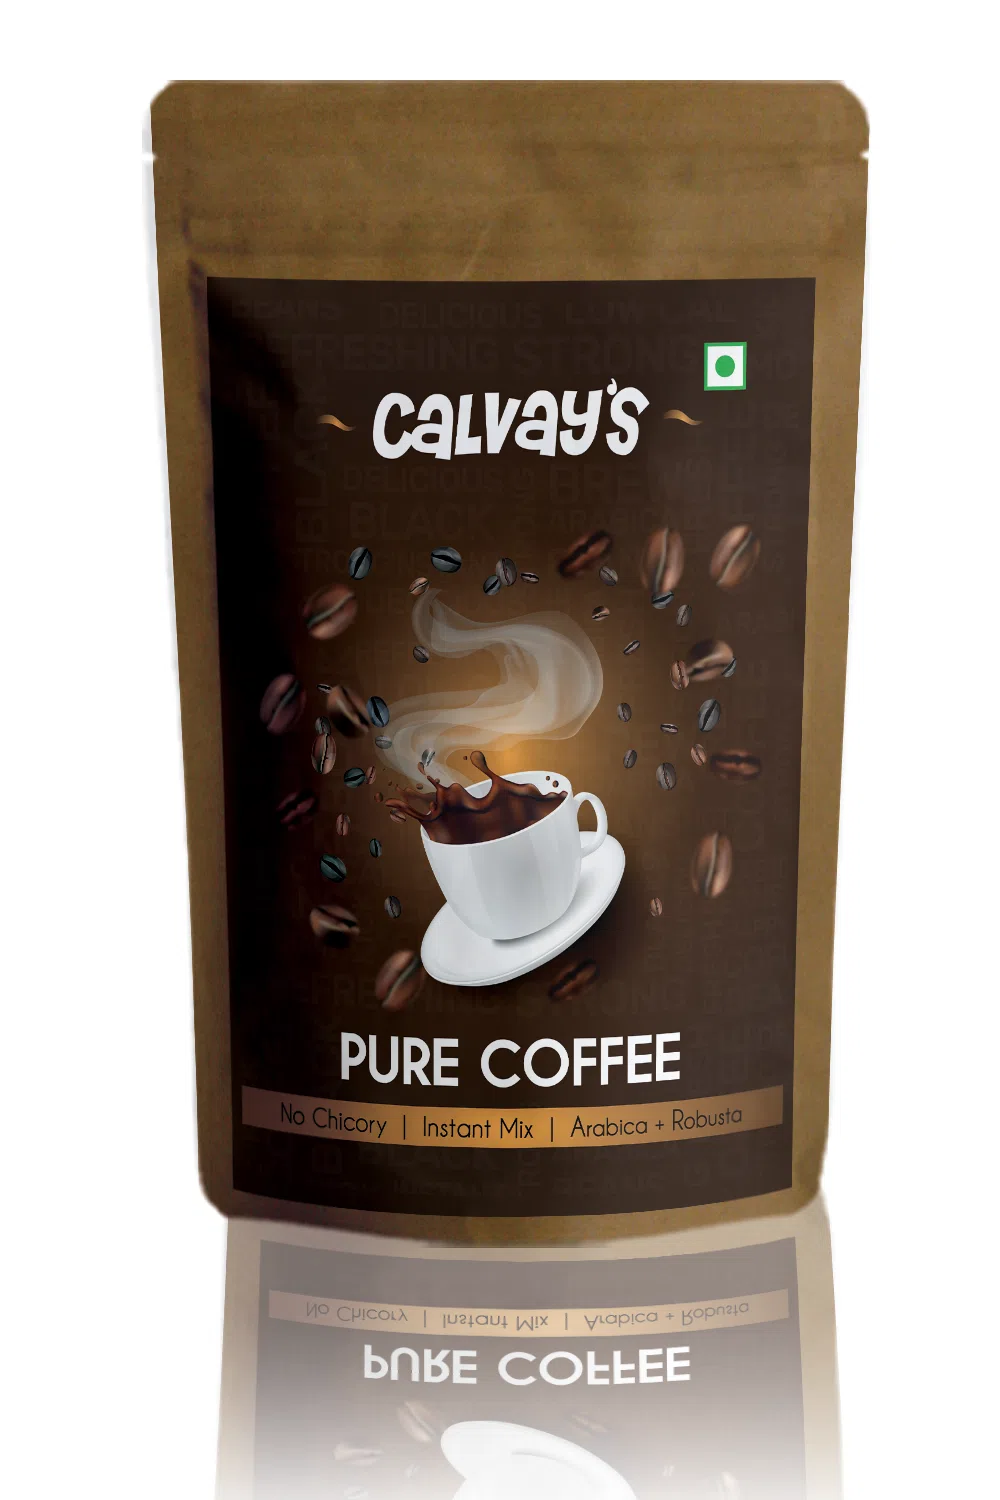 Image of Calvays Pure coffee powder front